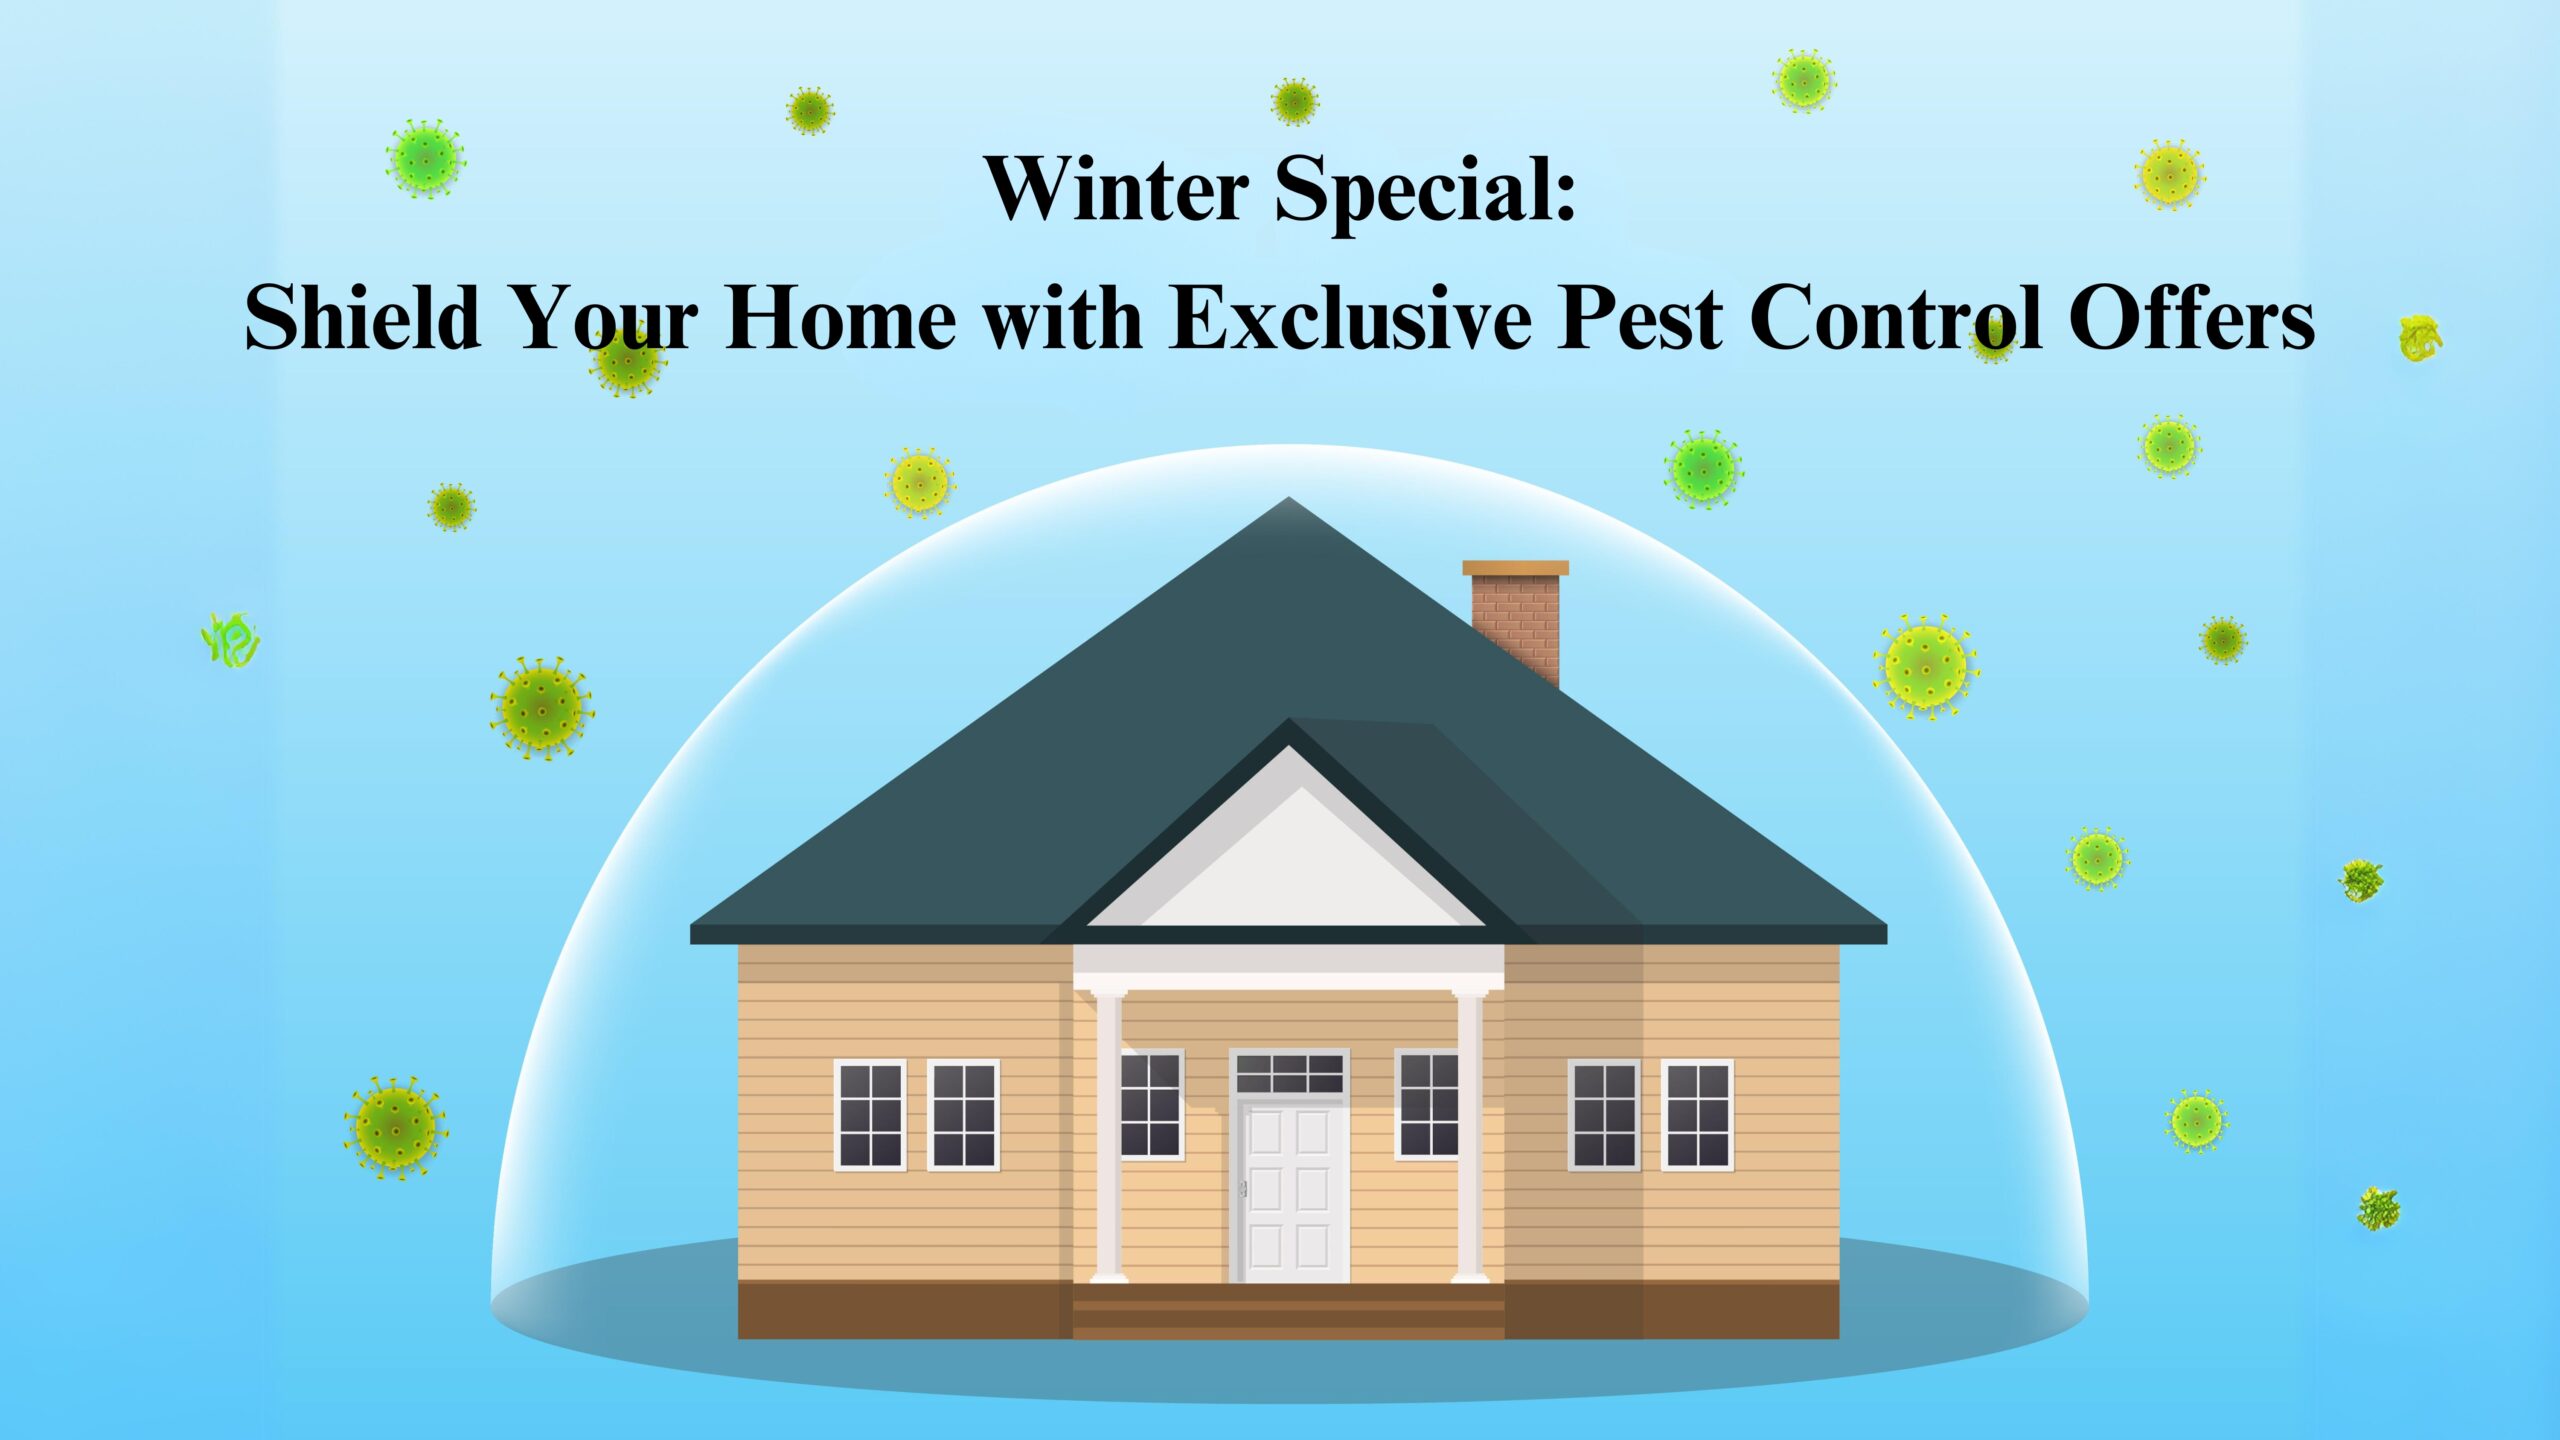 Shield Your Home with Exclusive Pest Control Offers